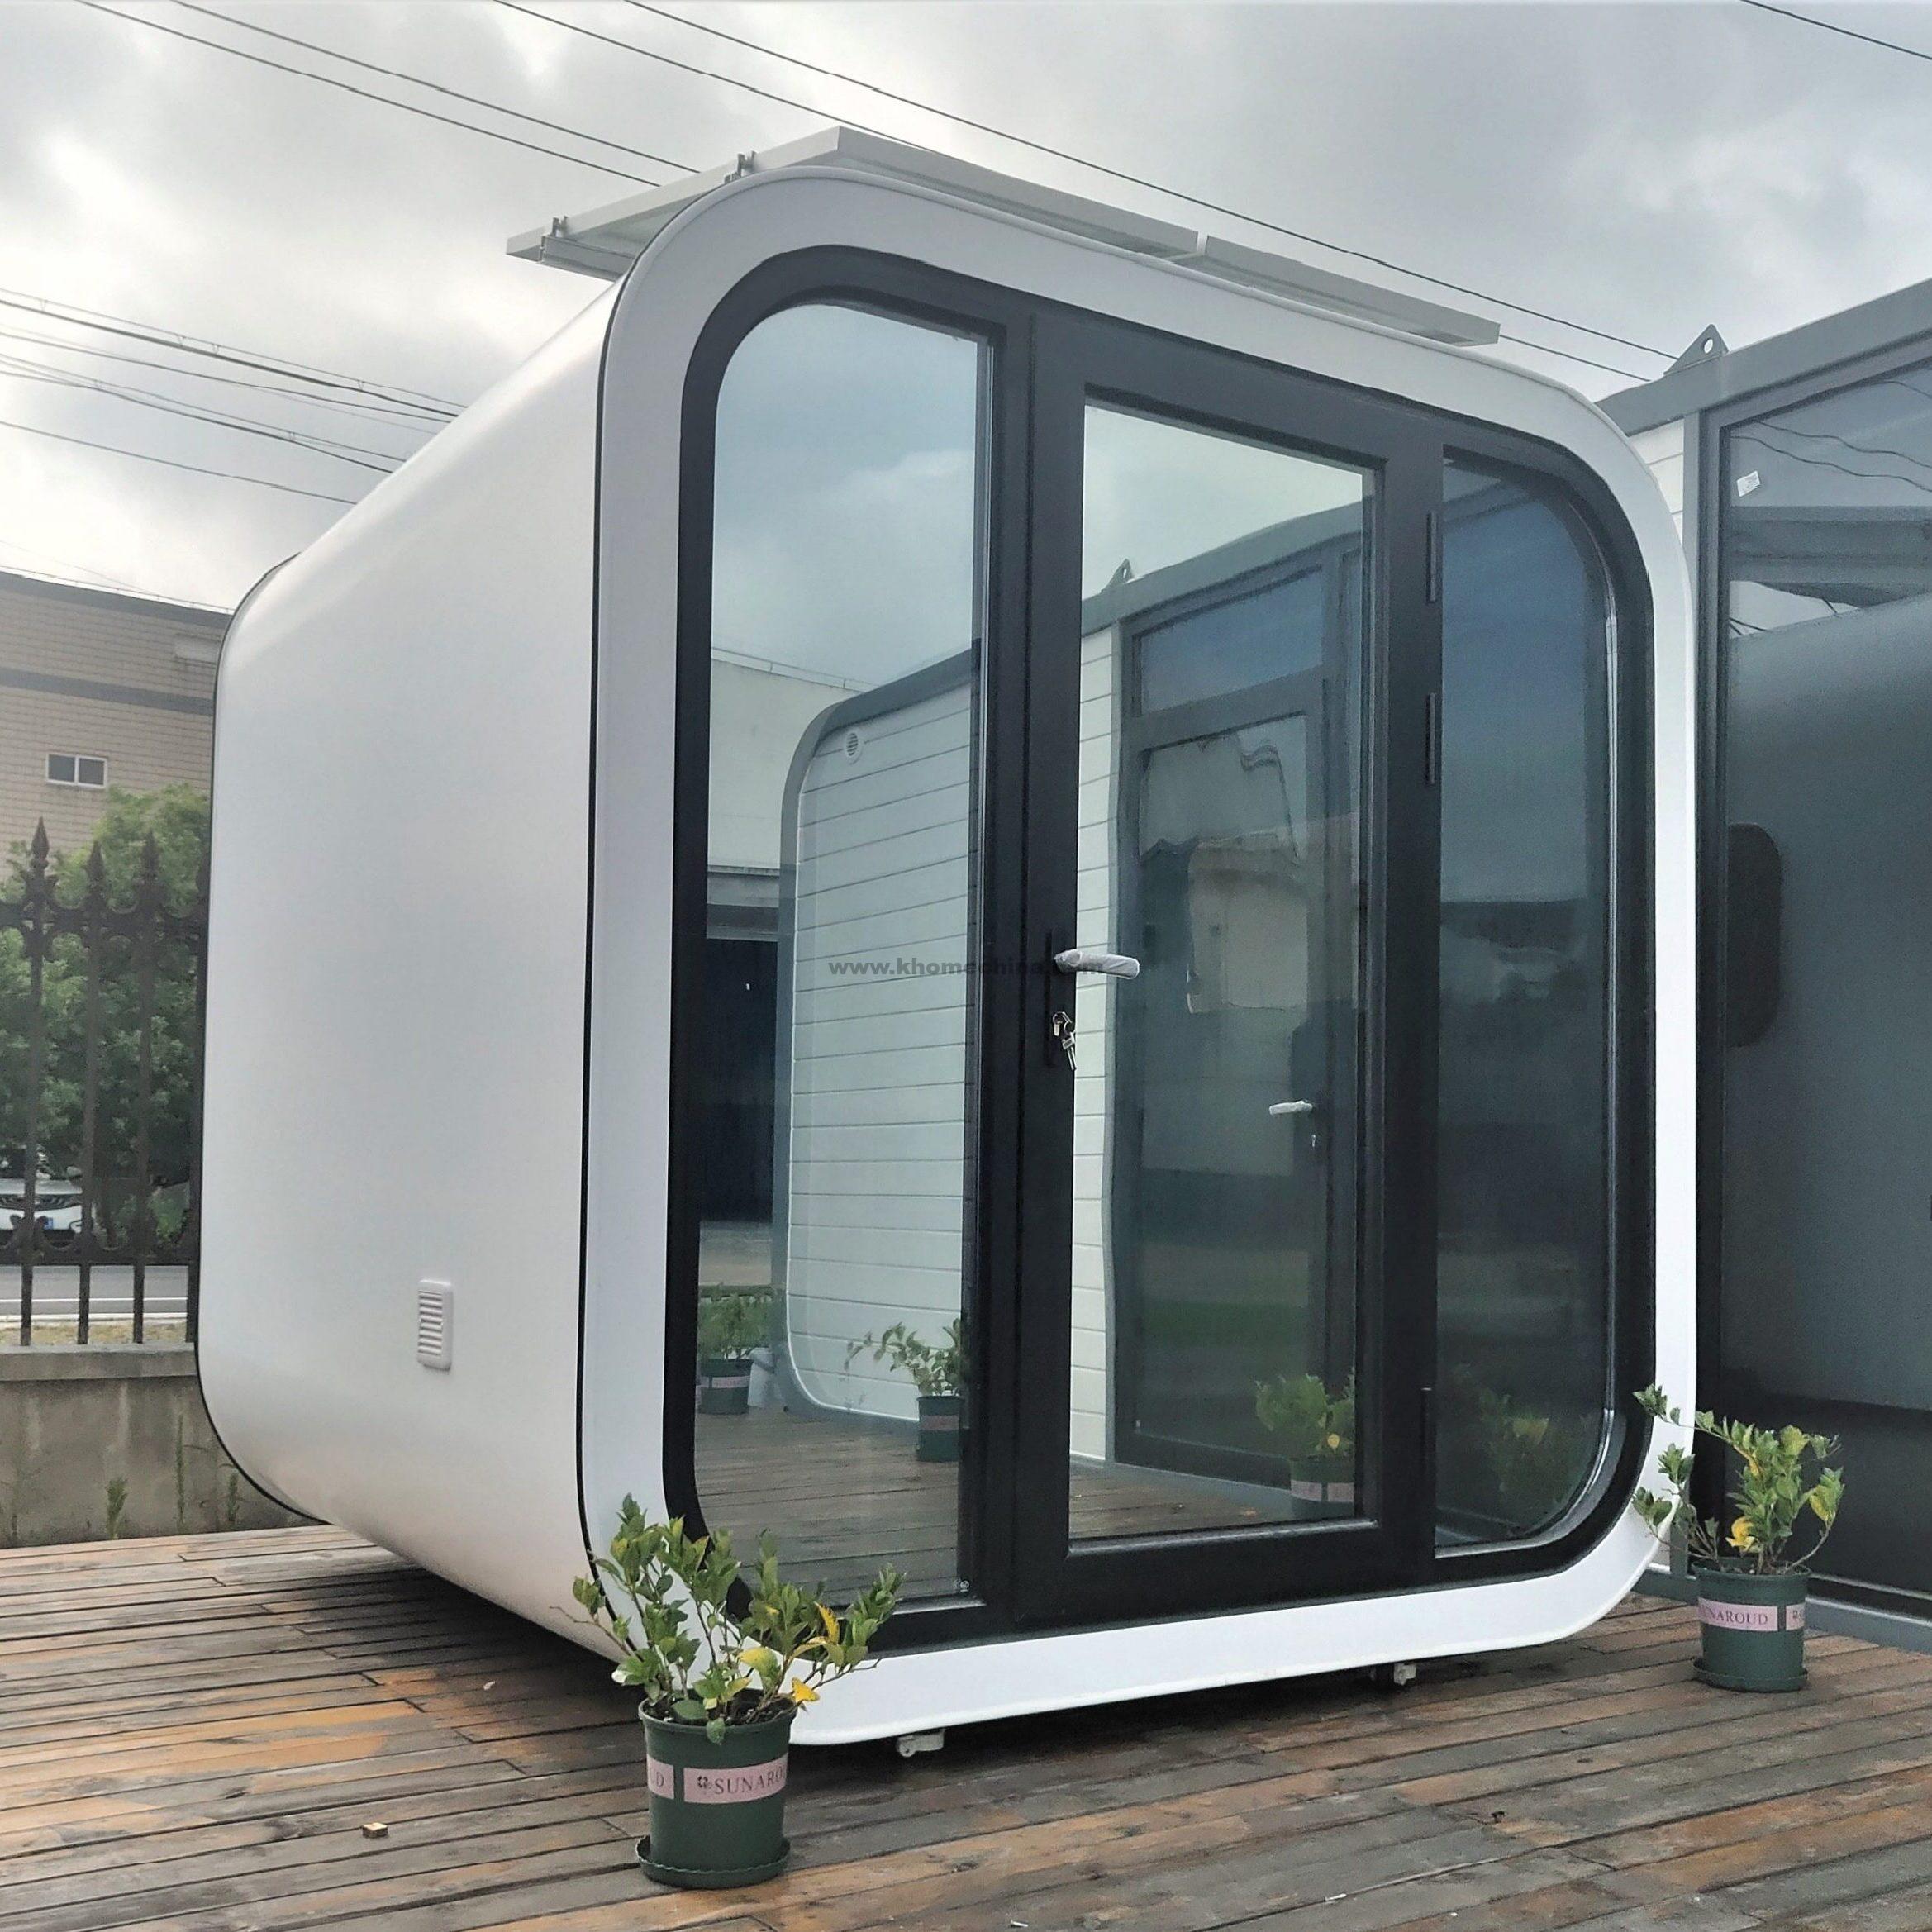 off-grid backyard office pod with solar panels